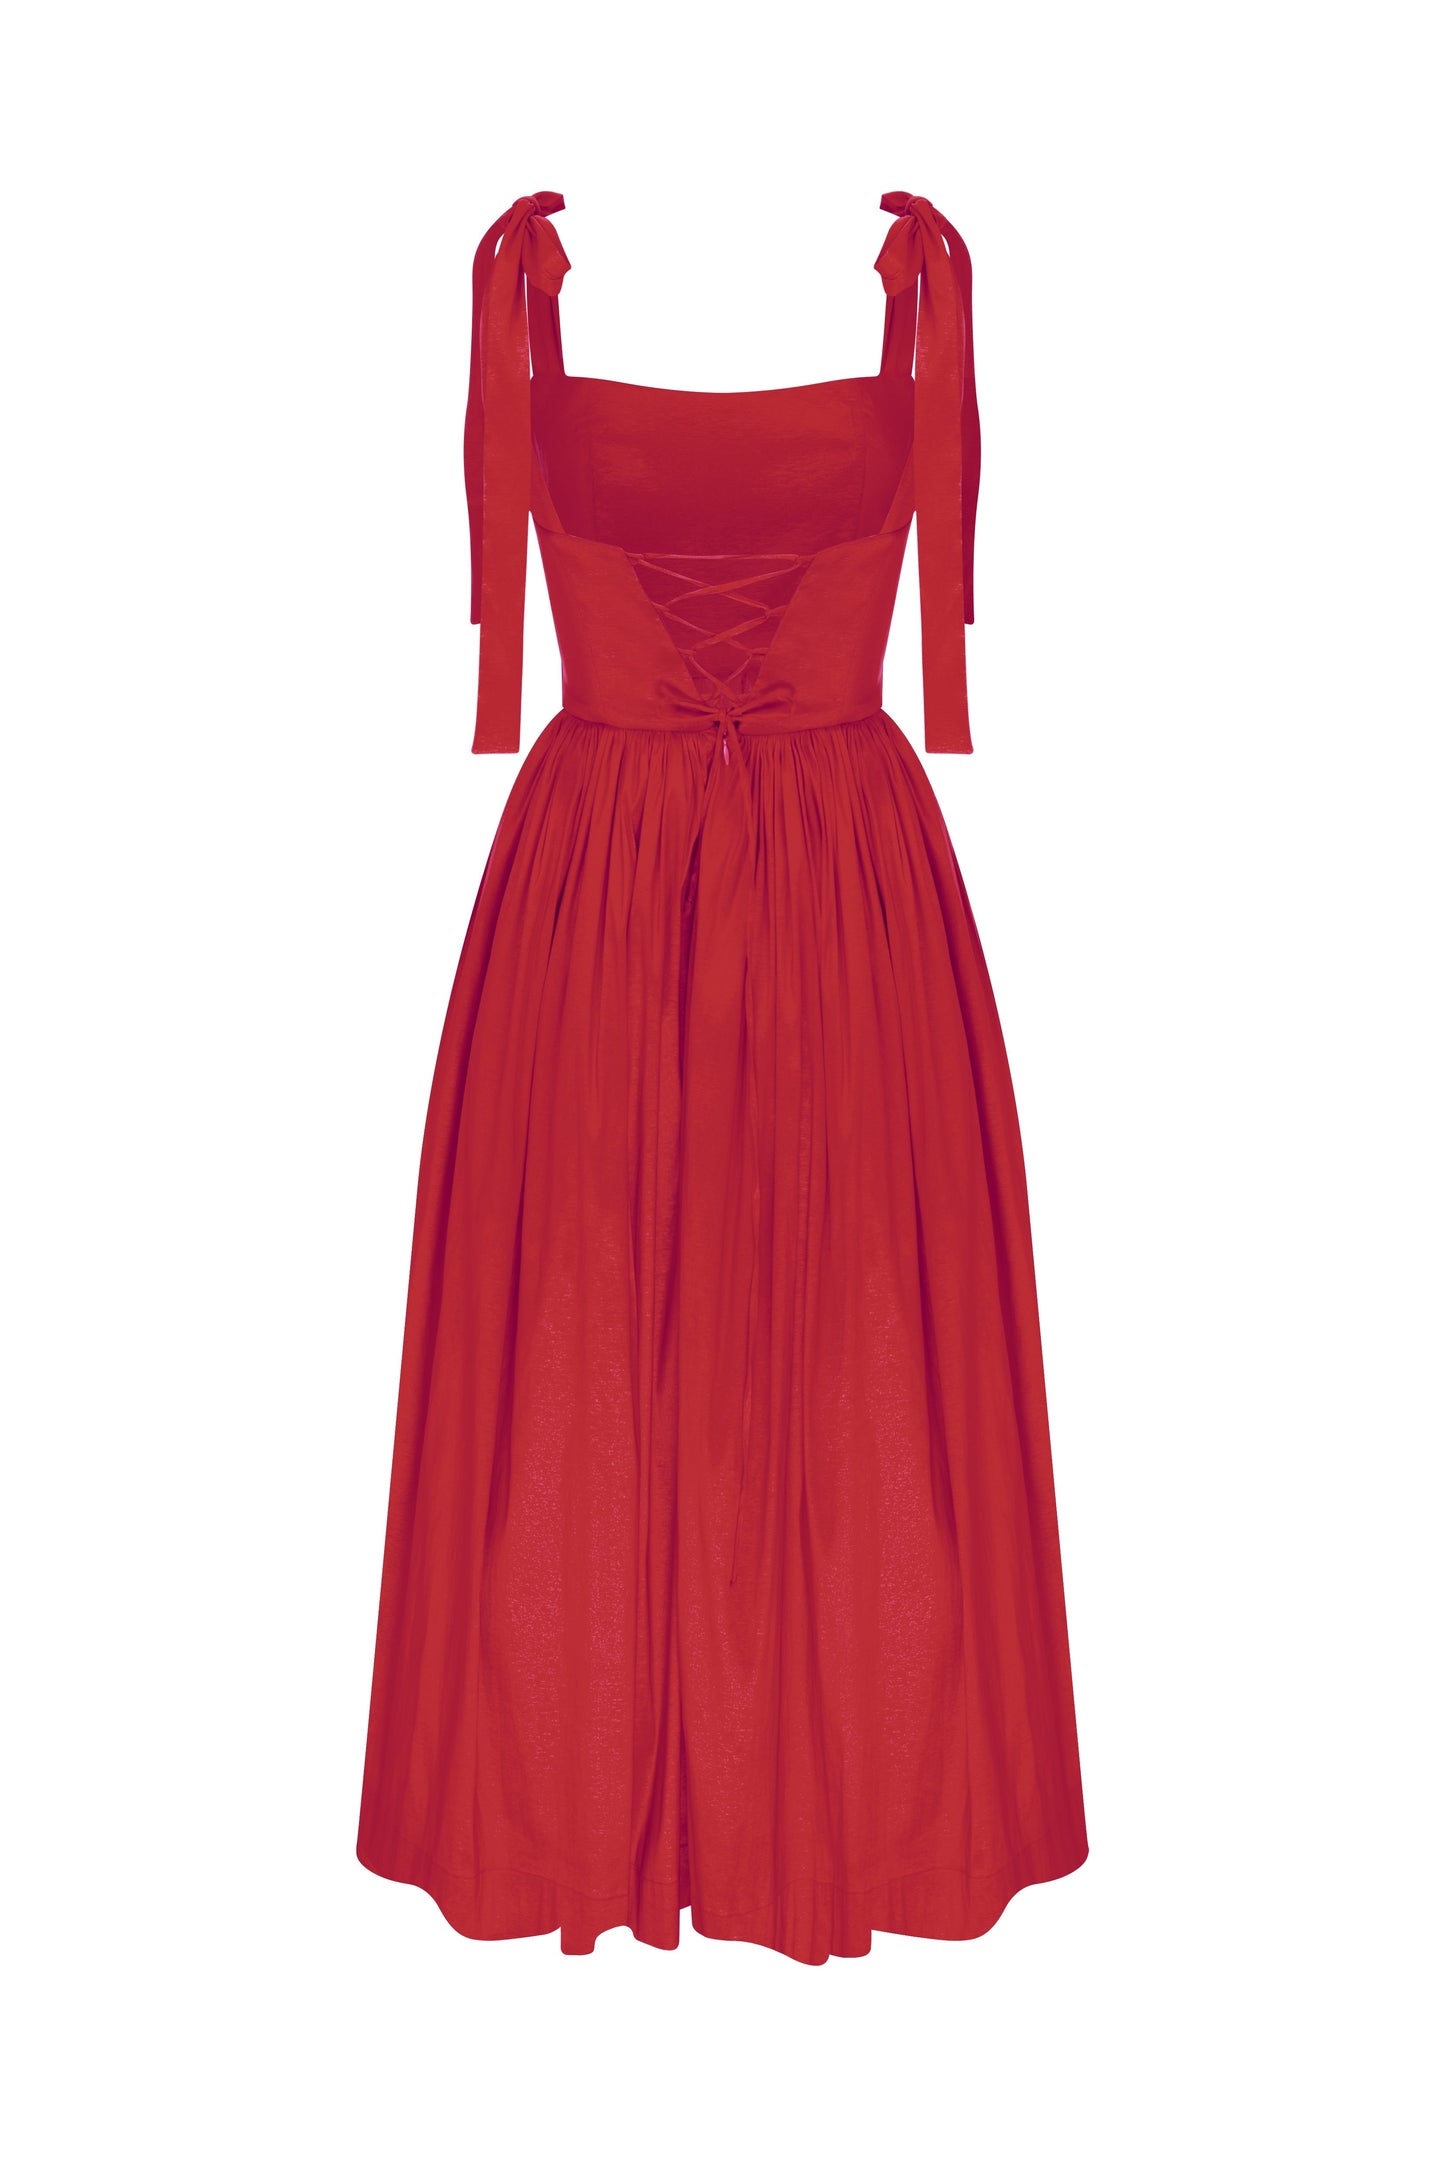 Sibby Midi Dress in Rouge